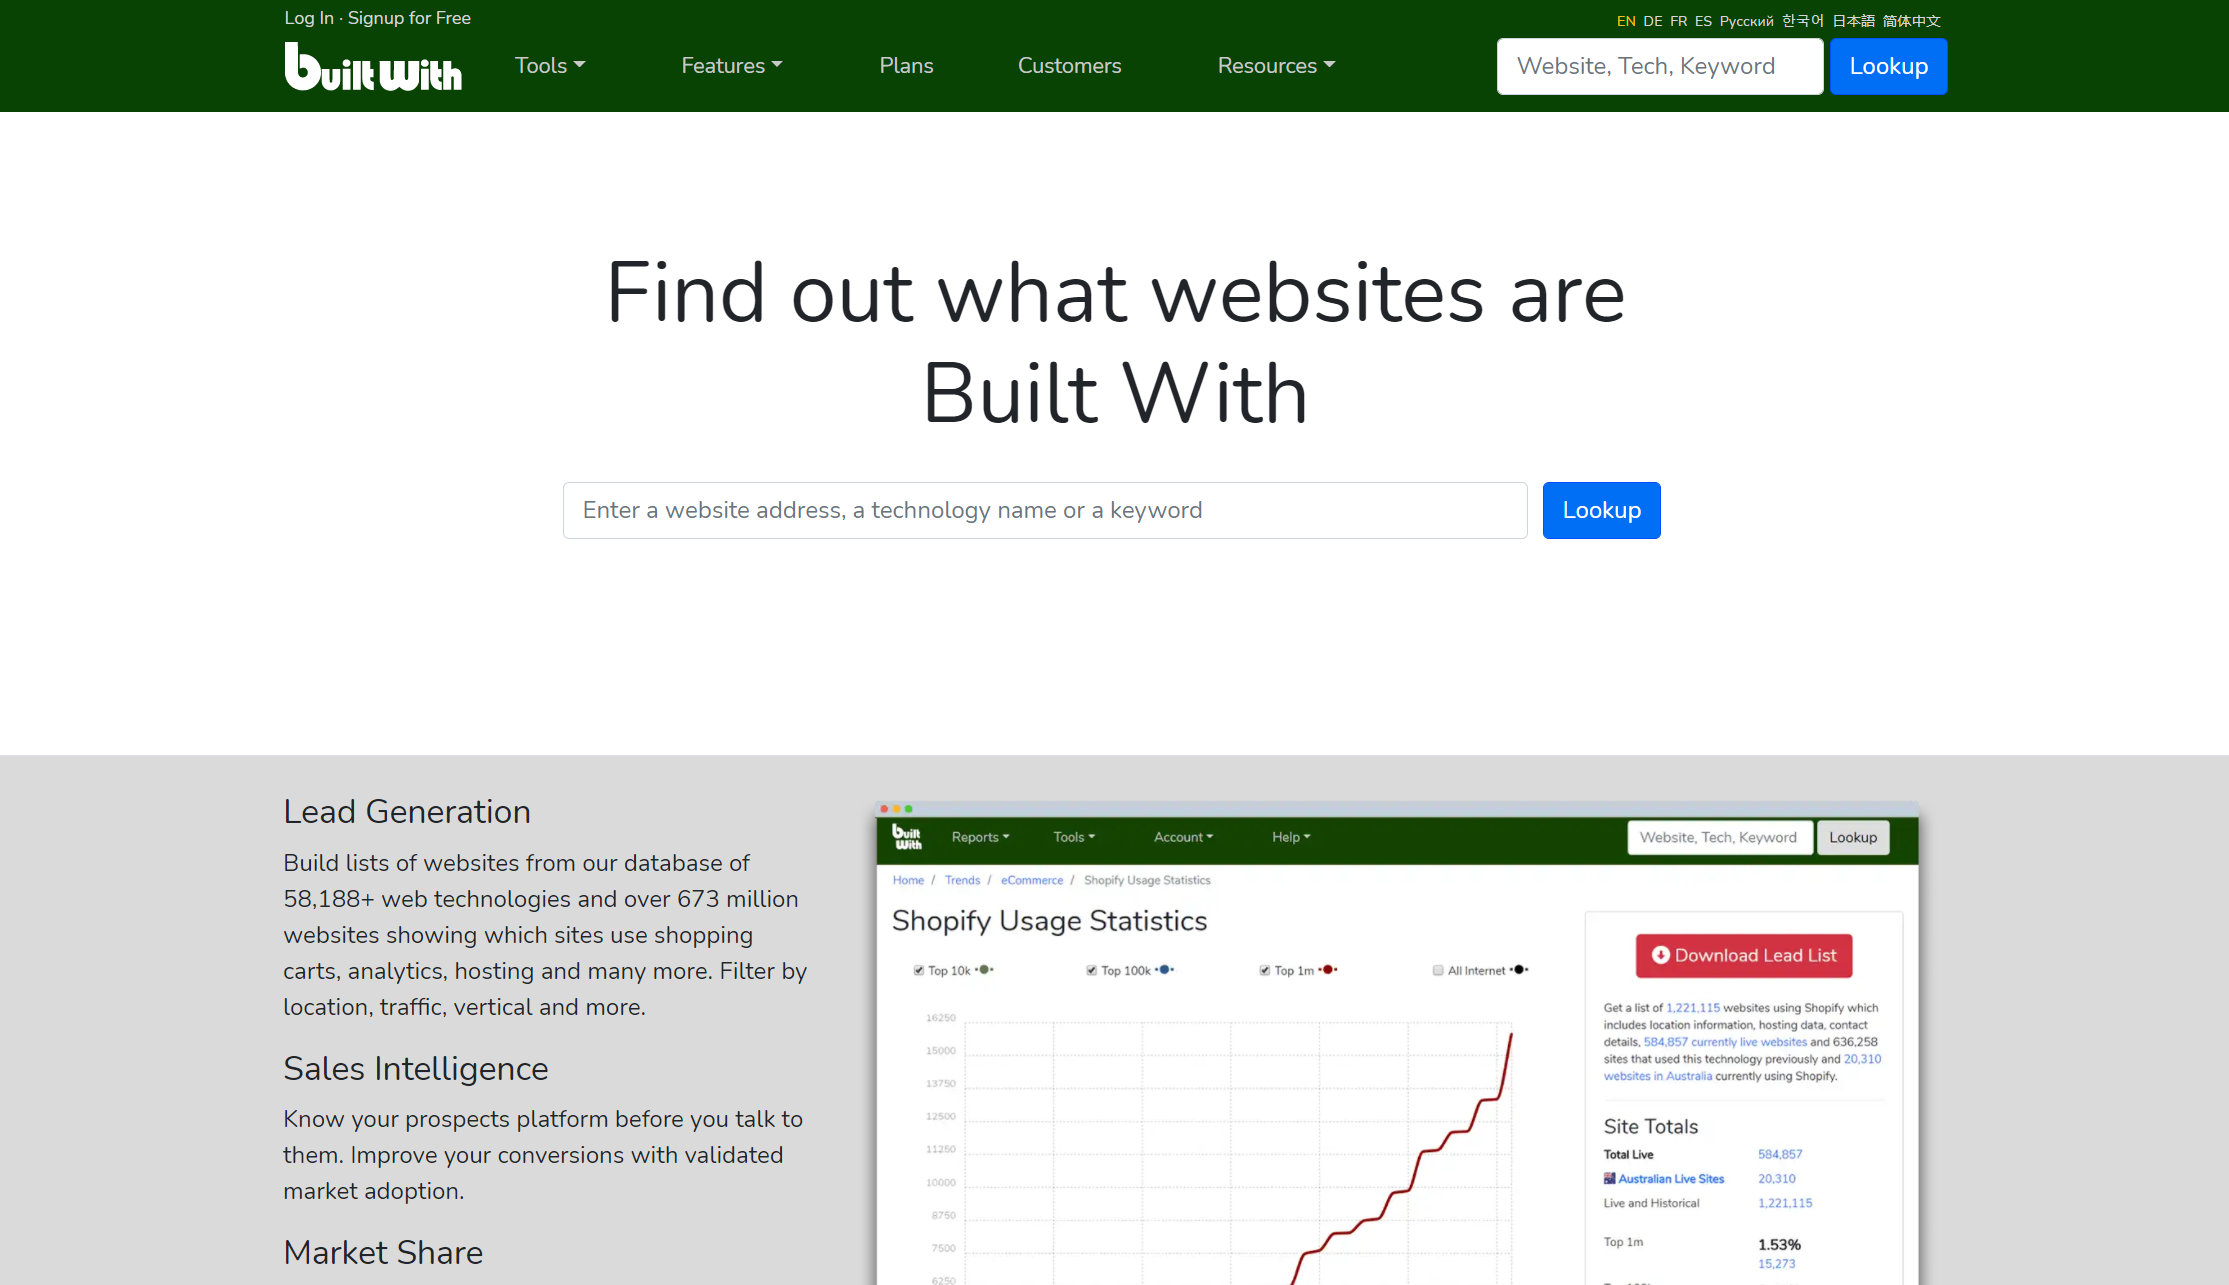 Builtwith's home page